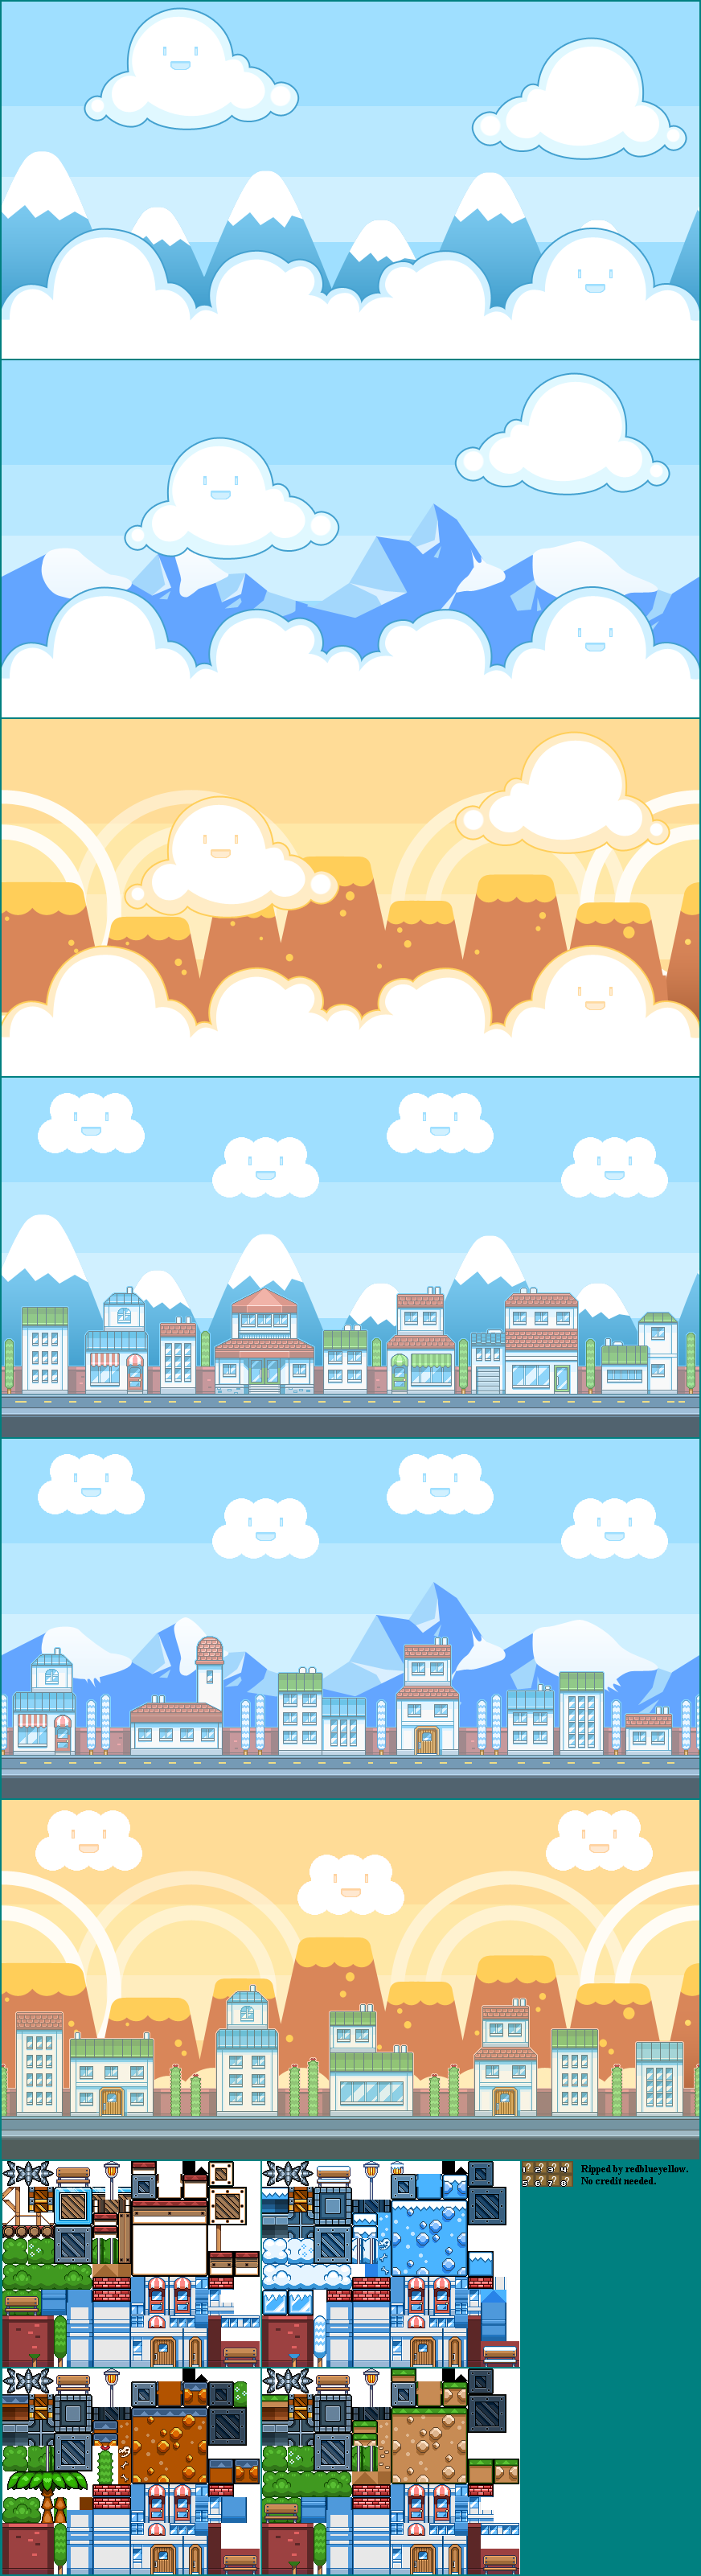 Pizza Boy - Backgrounds and Tiles